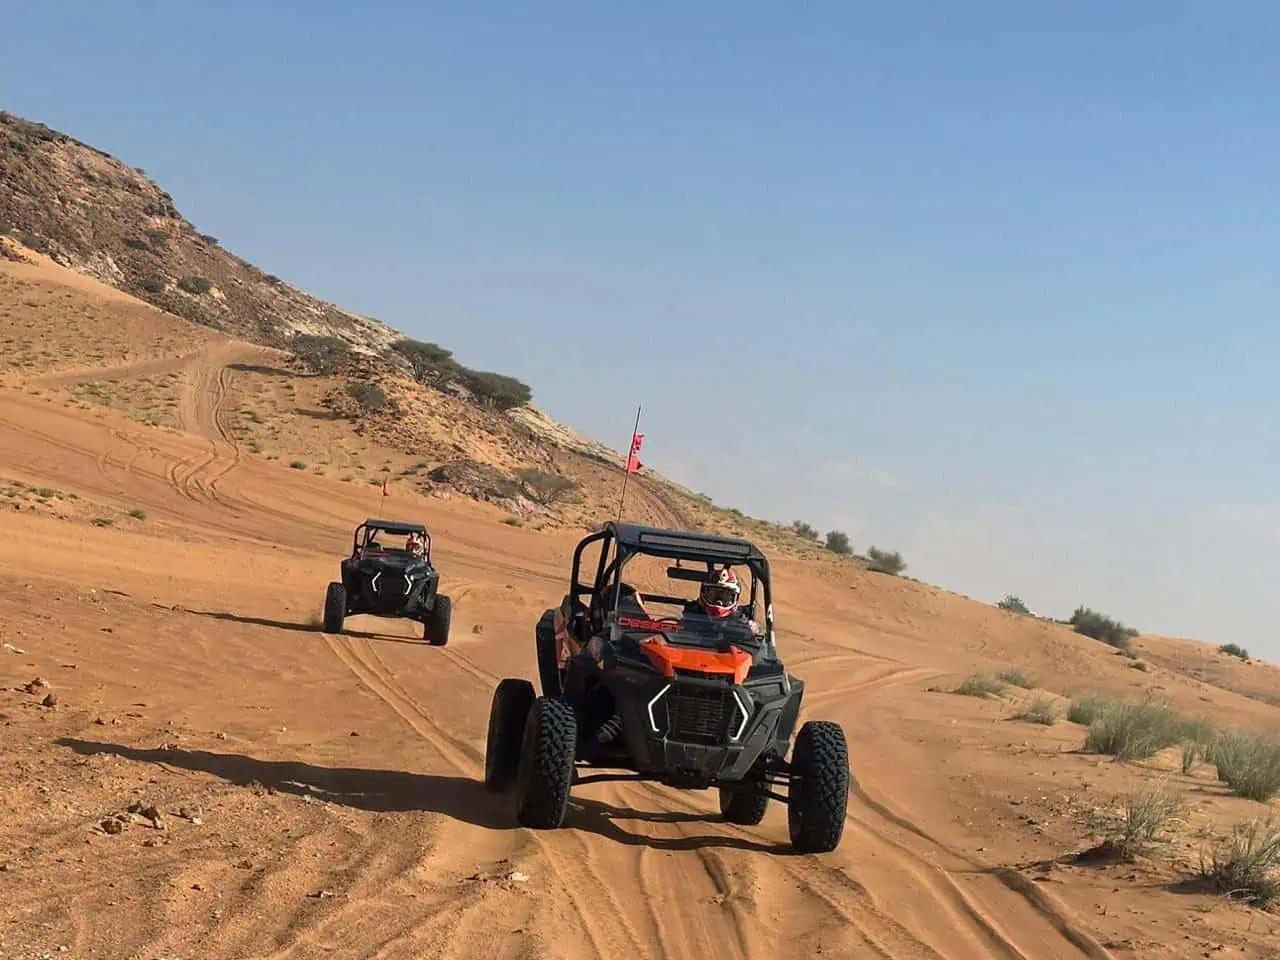 License for a Dune Buggy in Dubai